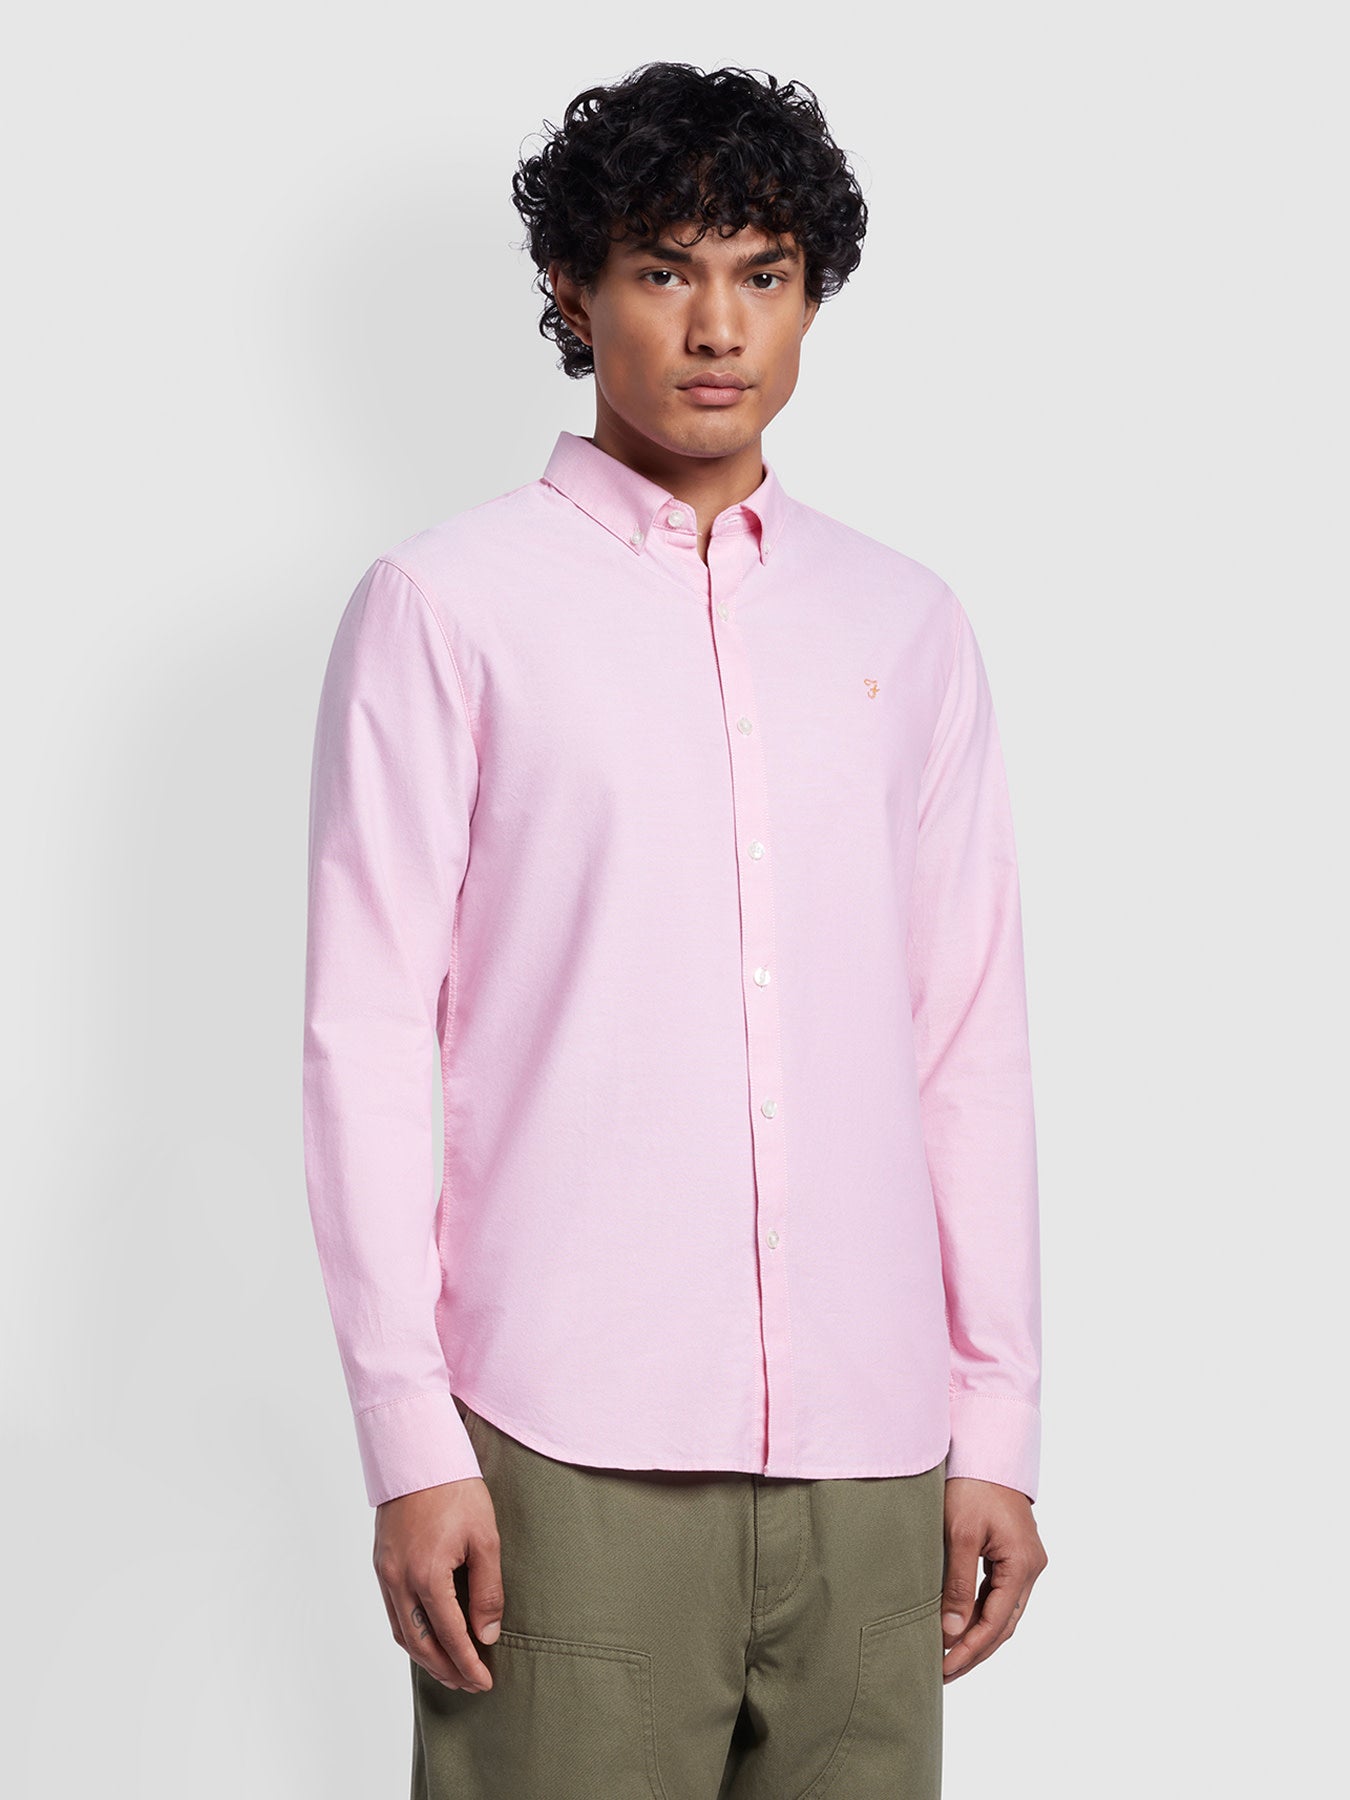 View Brewer Slim Fit Organic Cotton Long Sleeve Shirt In Coral Pink information